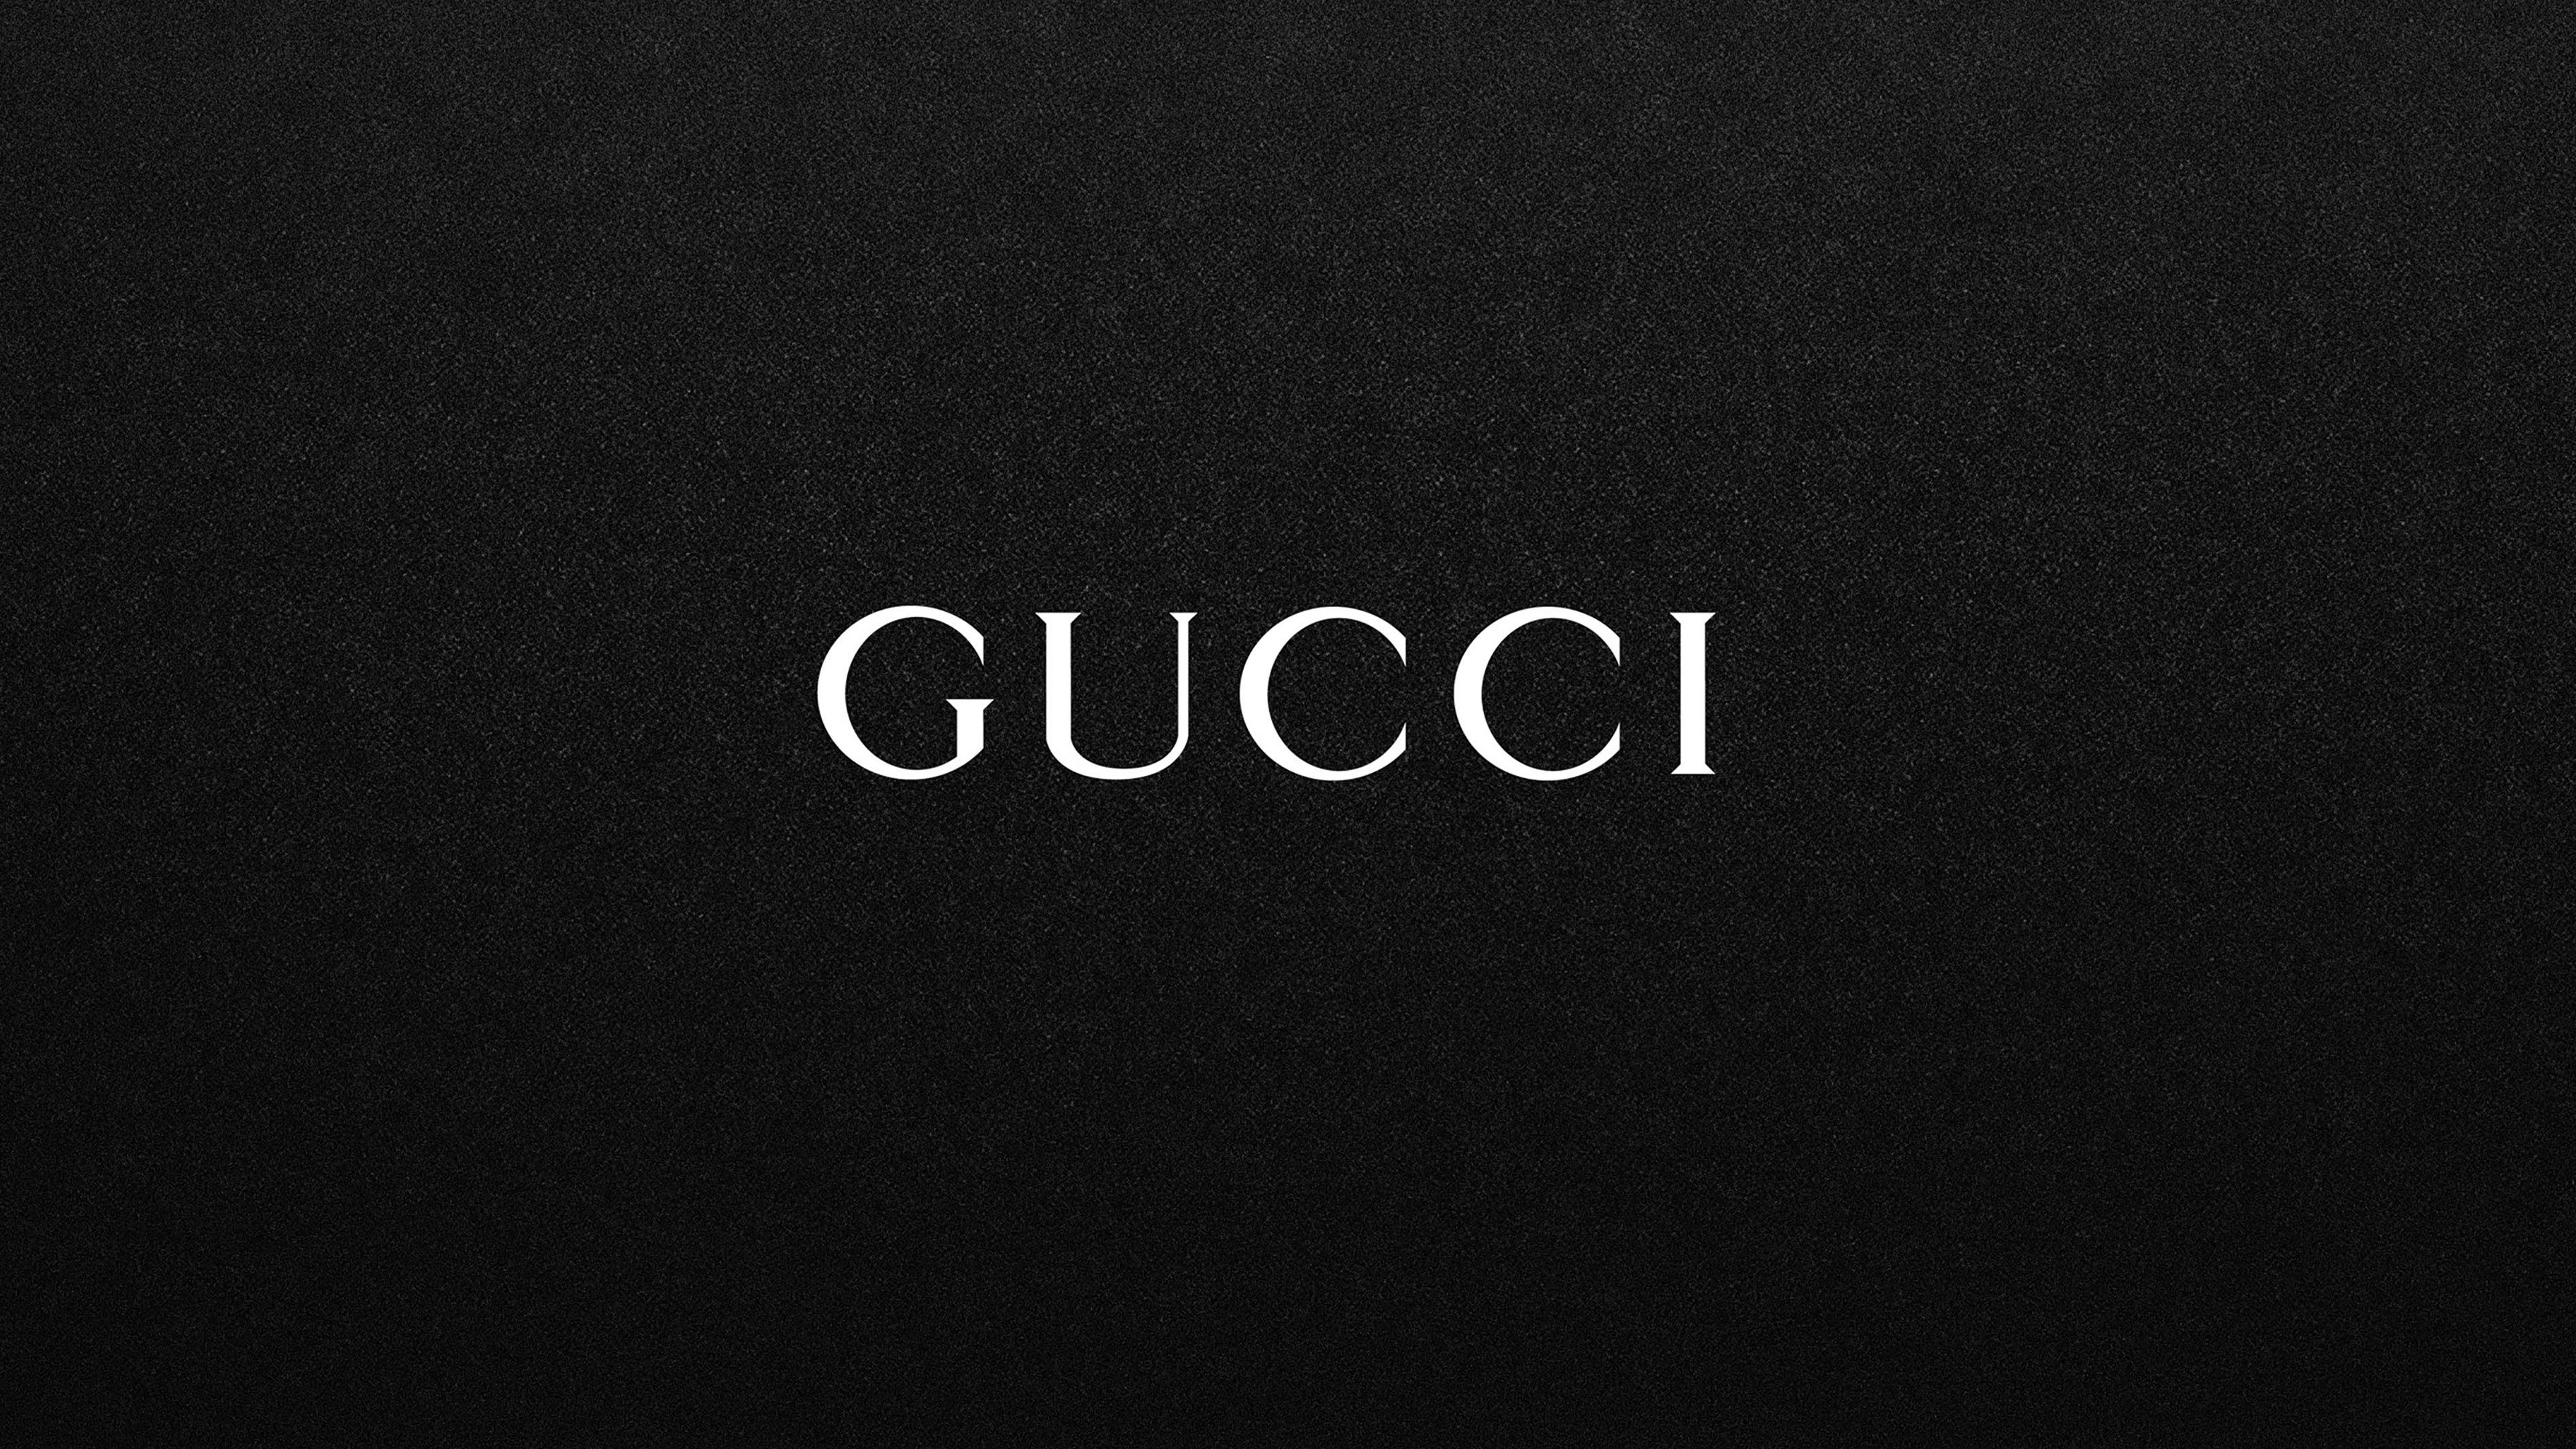 Gucci Twitter Background. Gucci Dope